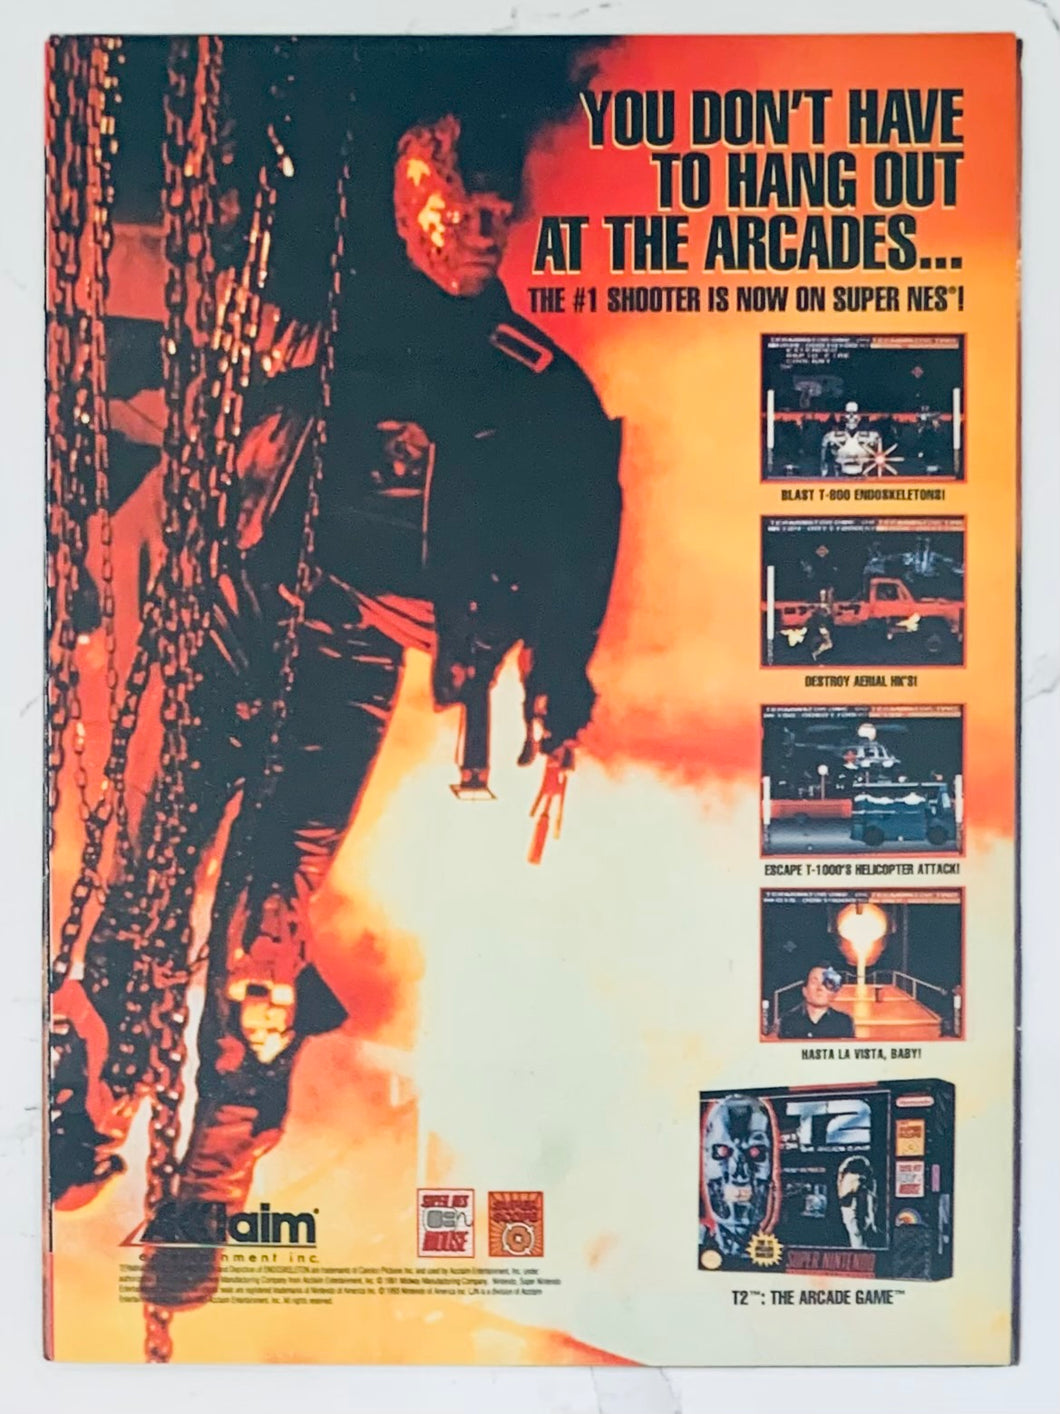 T2: The Arcade Game - SNES - Original Vintage Advertisement - Print Ads - Laminated A4 Poster